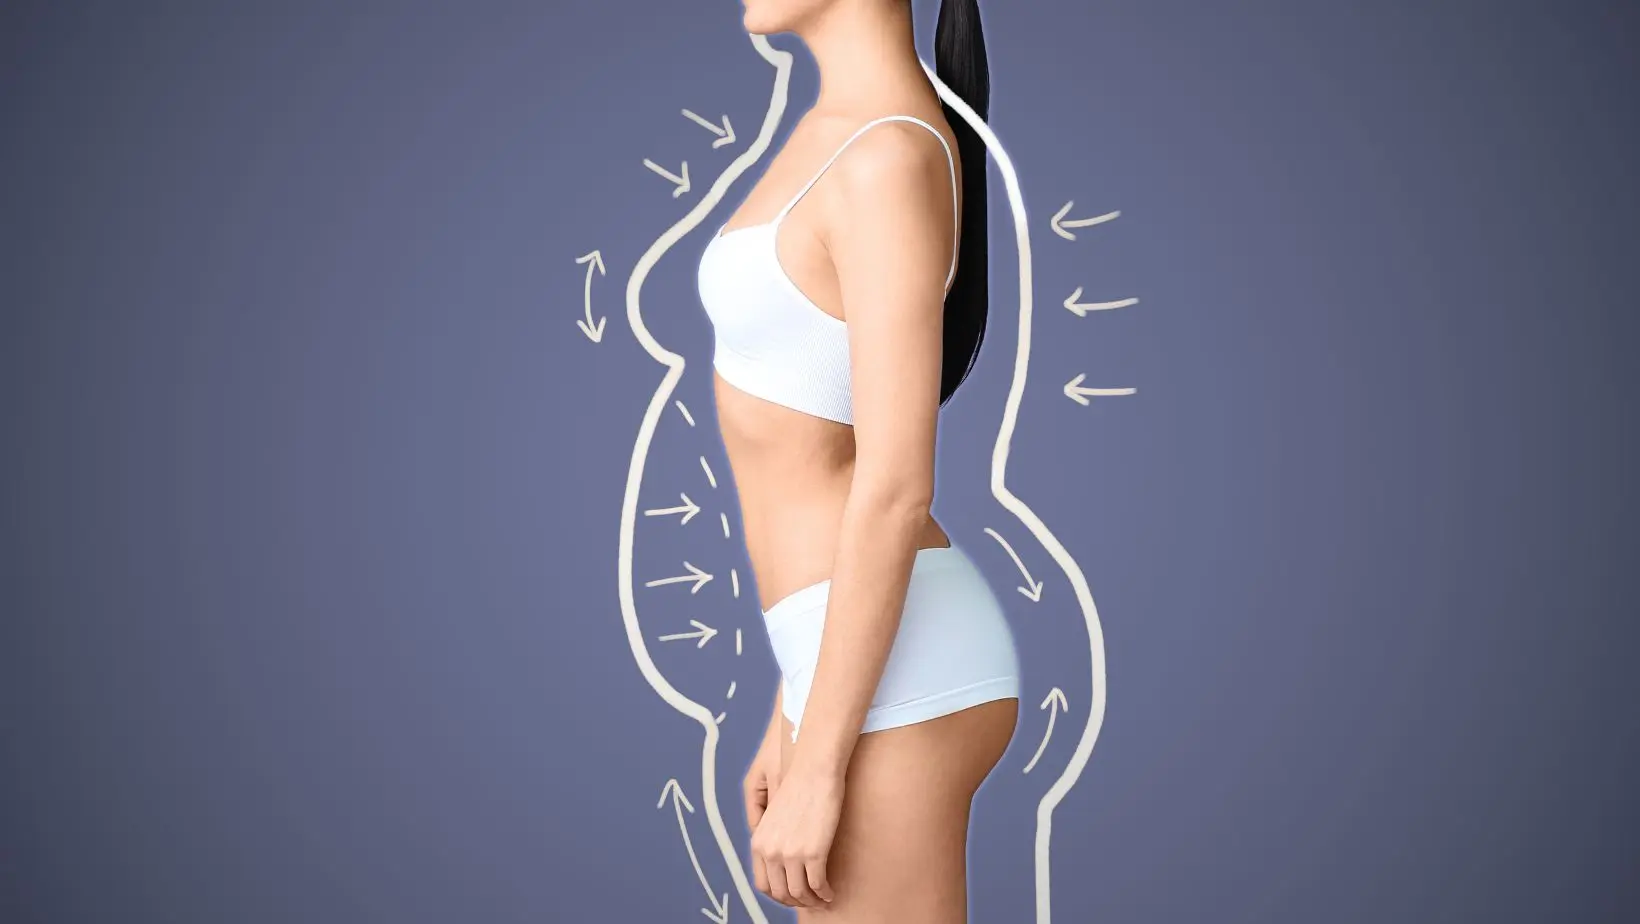 An introduction to non-invasive body contouring - Body Contouring